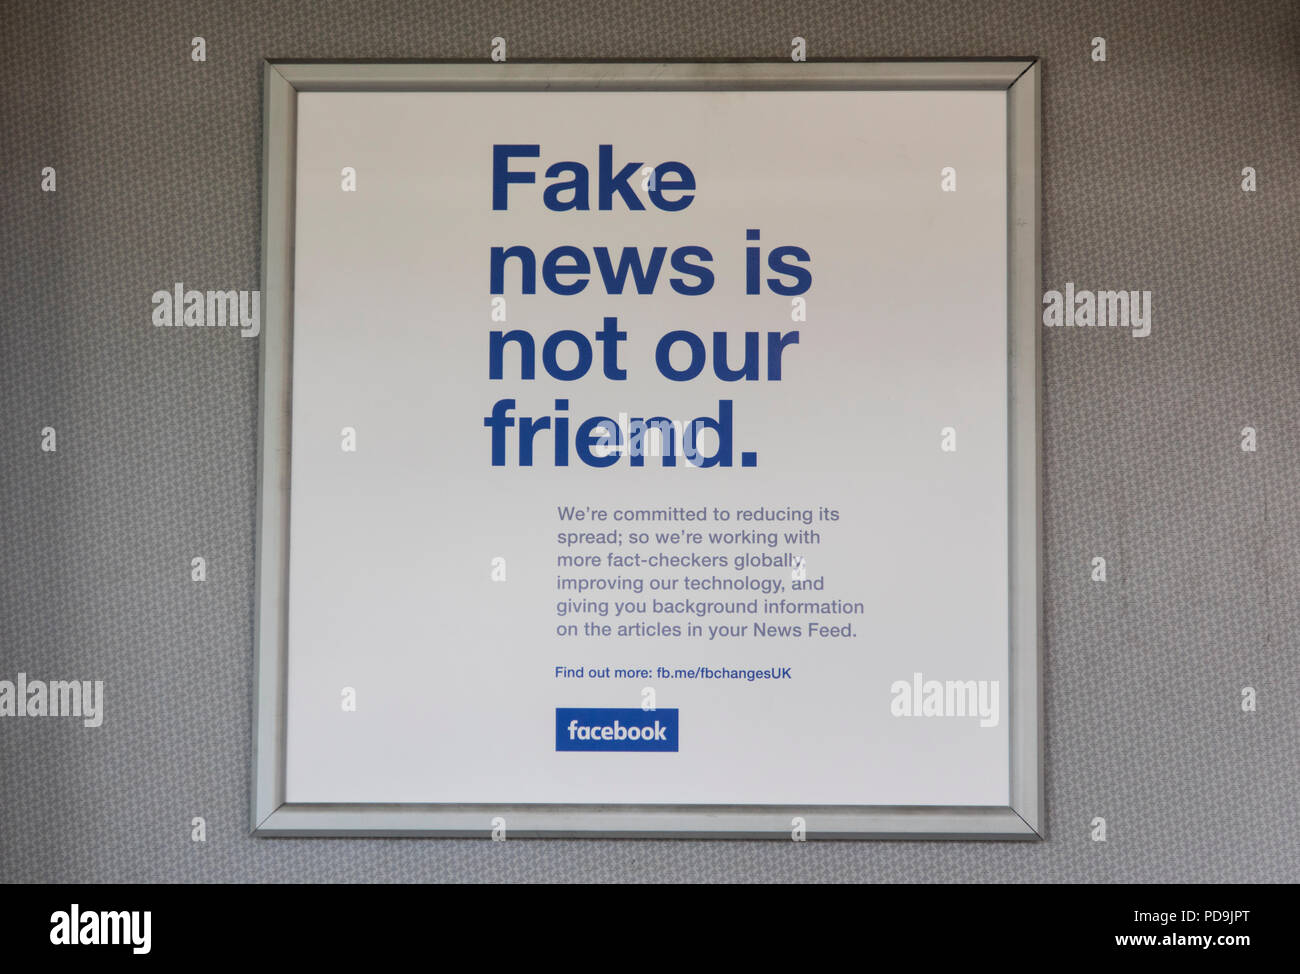 LONDON, UK - AUGUST 7th 2018: Facebook fake news advert. Facebook announcement to reduce fake news stories on the social media website Stock Photo